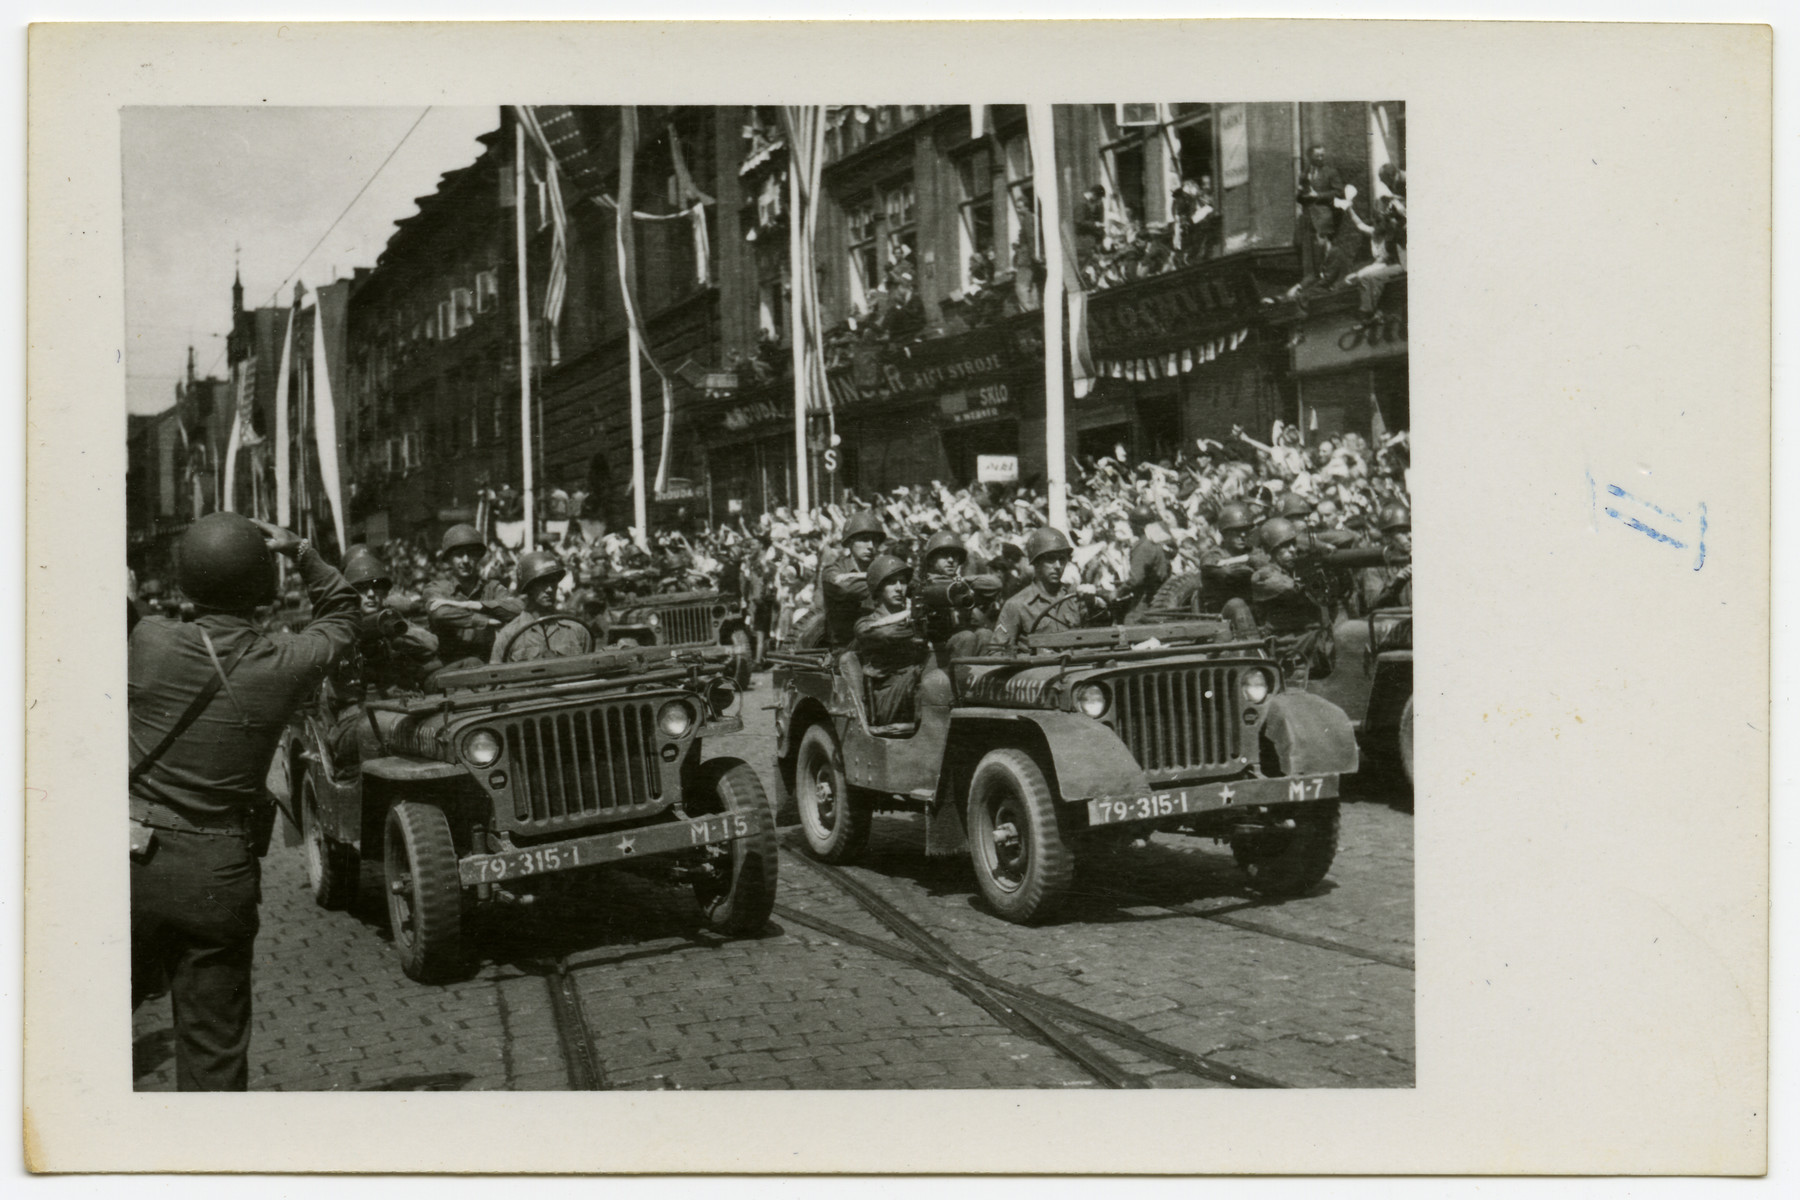 American soldiers drive through Pilsen, Czechoslovakia on its liberation day.